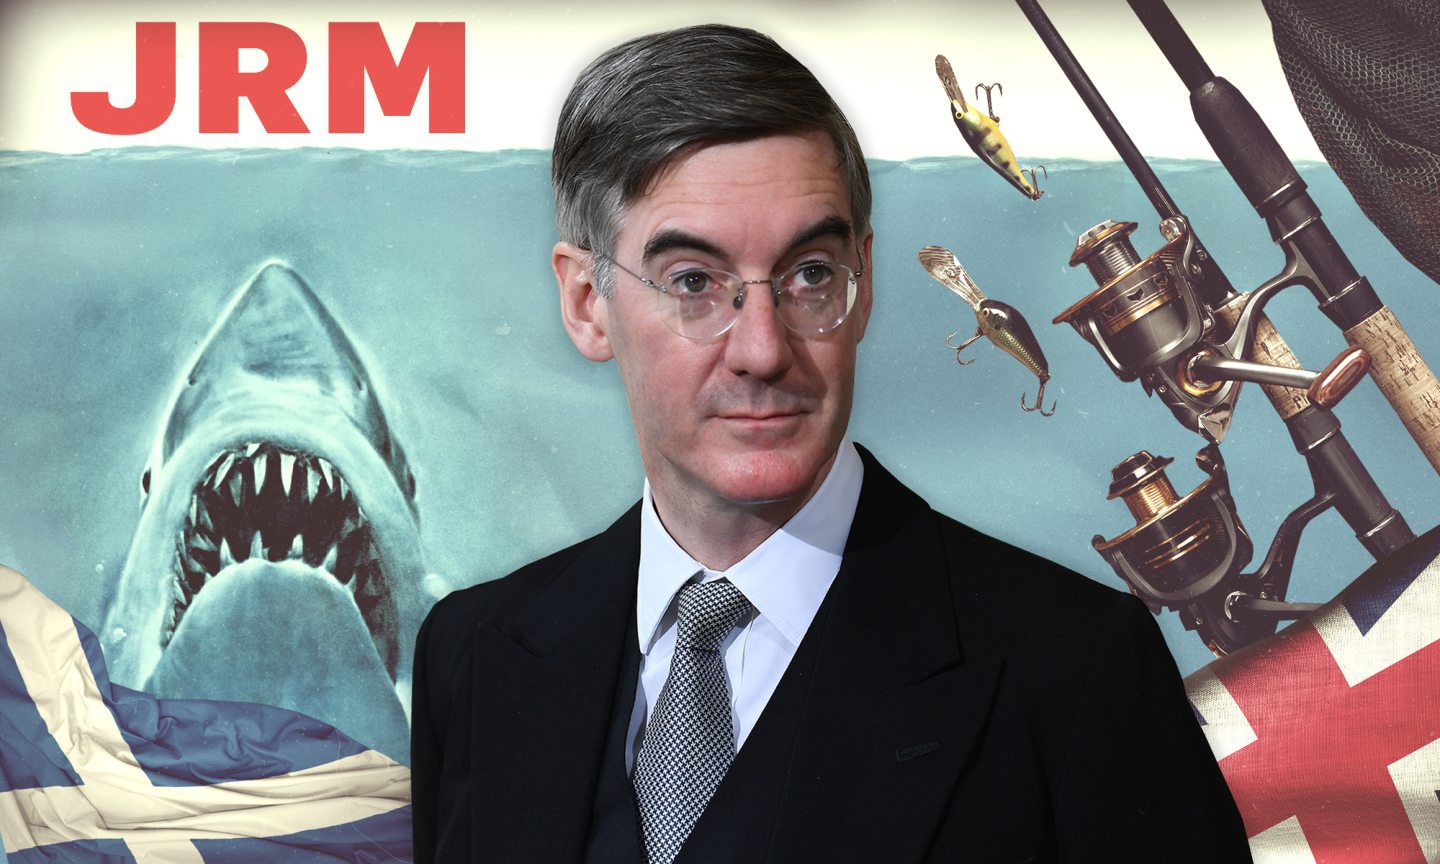 When Jacob Rees-Mogg went fishing in Arbroath